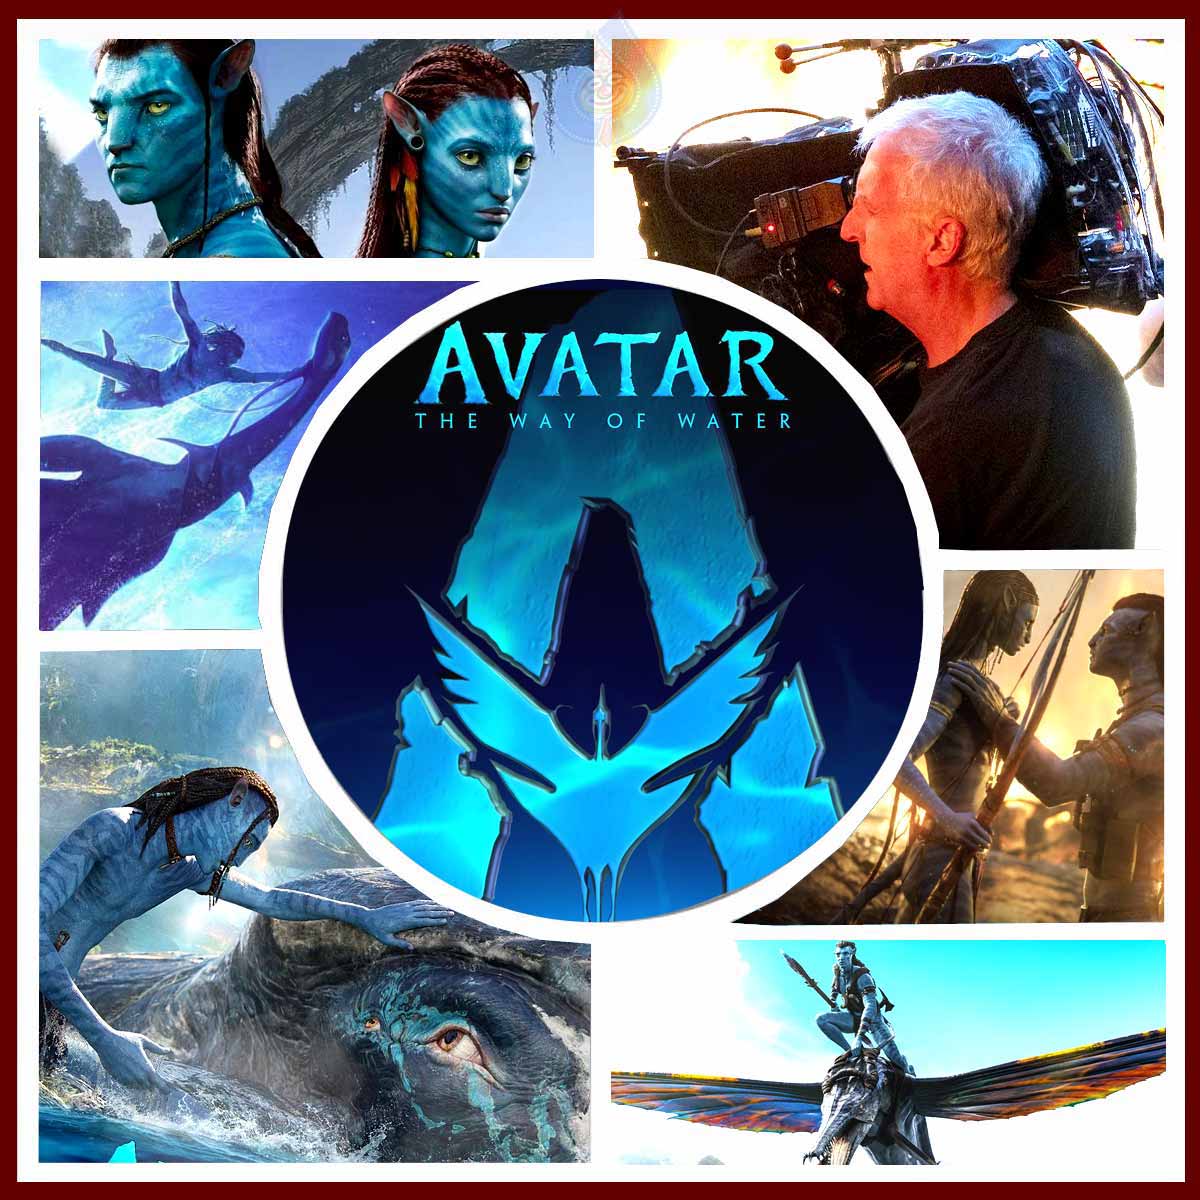 7 Reasons to watch Avatar 2: The Way of Water